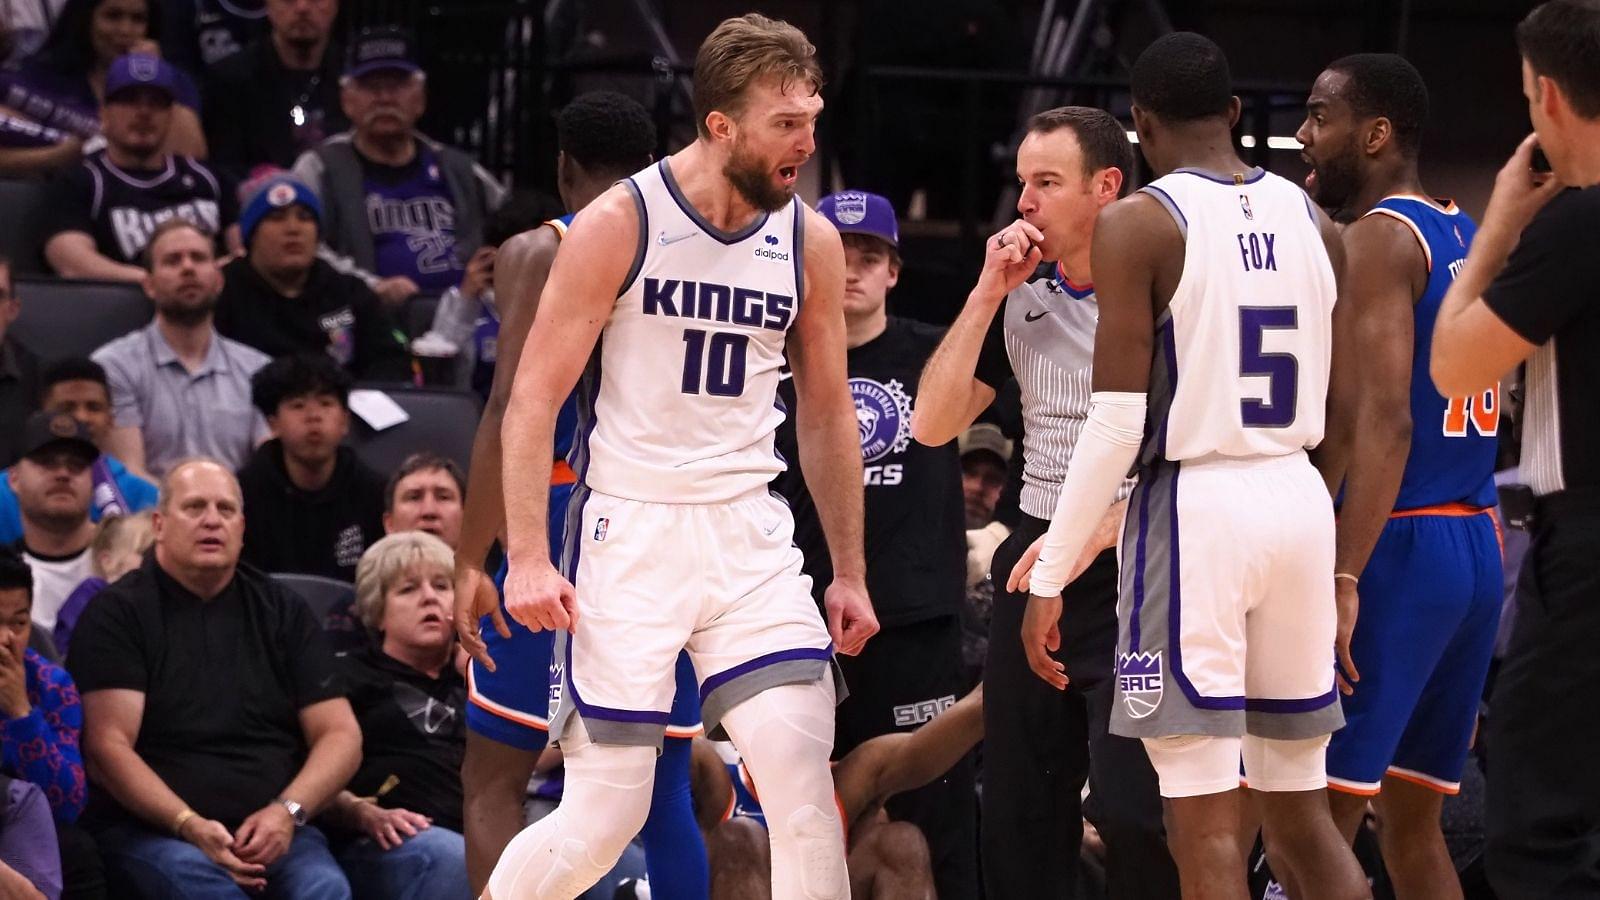 "We disagree with the NBA’s decision to suspend Domantas Sabonis": Sacramento Kings defend their Lithuanian big man by Tweeting their dissent